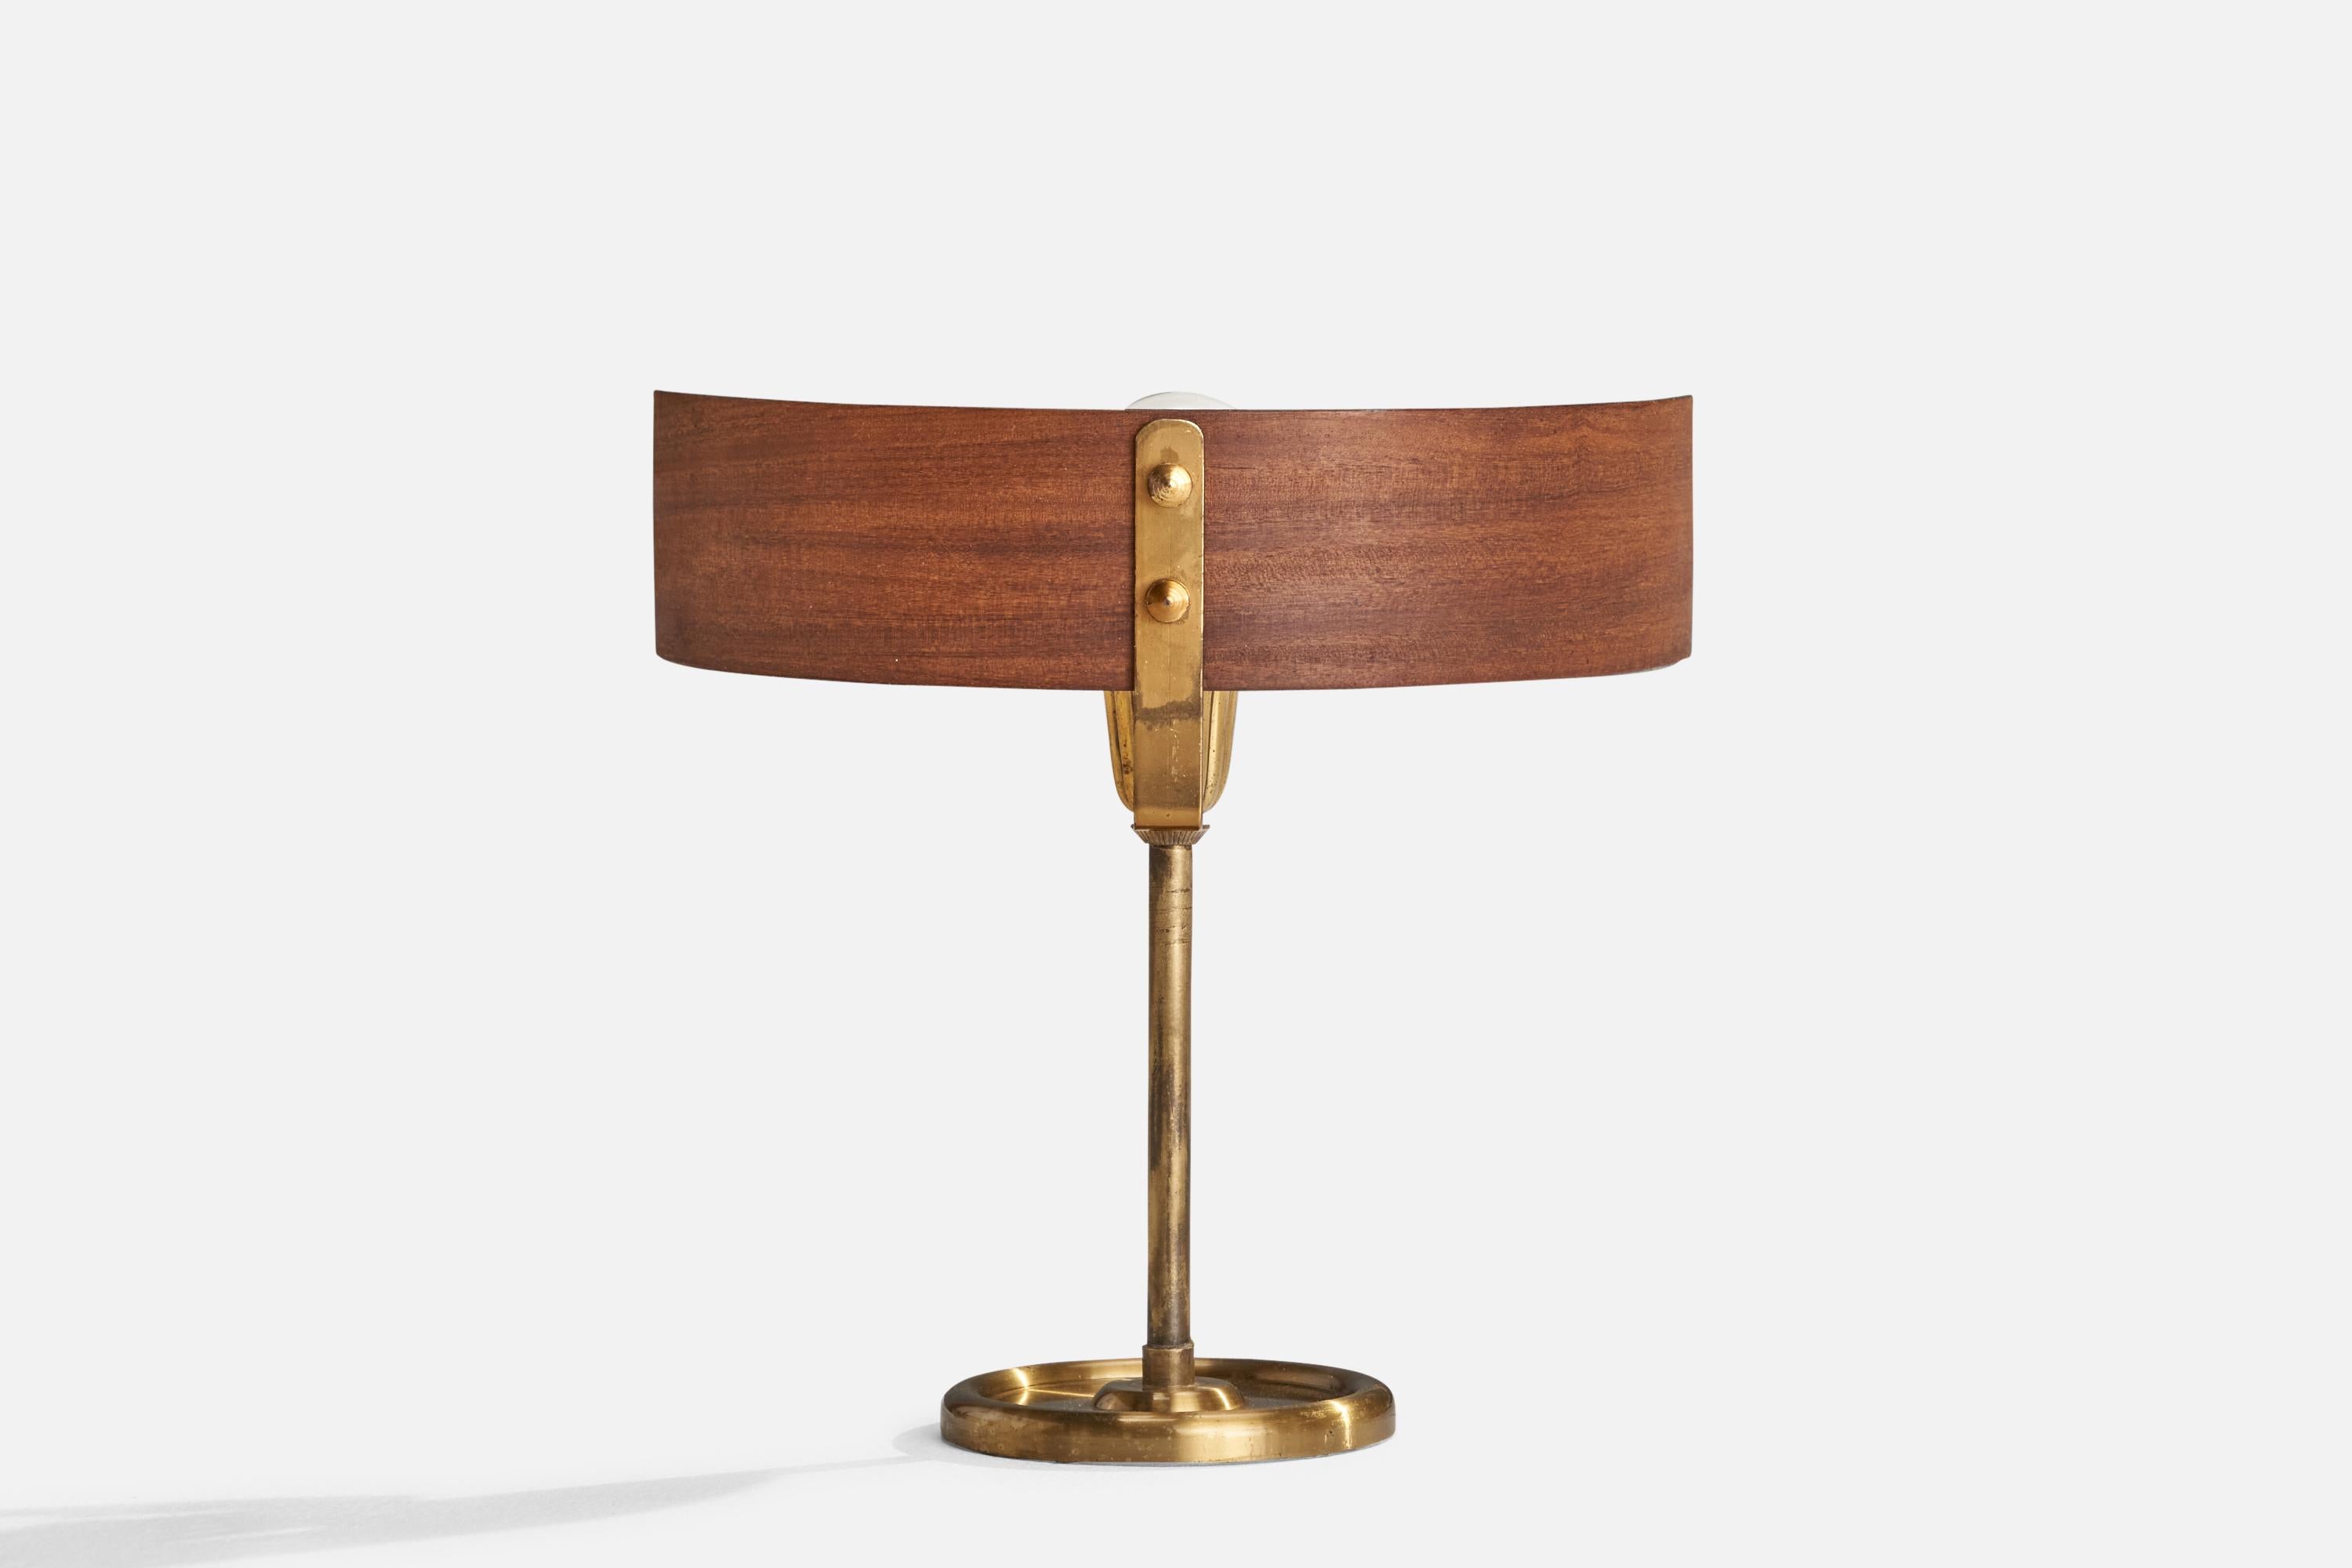 A brass and moulded teak table lamp designed and produced in Italy, c. 1950s.

Overall Dimensions (inches): 9.125” H x 9.375” W x 2.875” D
Stated dimensions include shade.
Bulb Specifications: E-14 Bulb
Number of Sockets: 1
All lighting will be